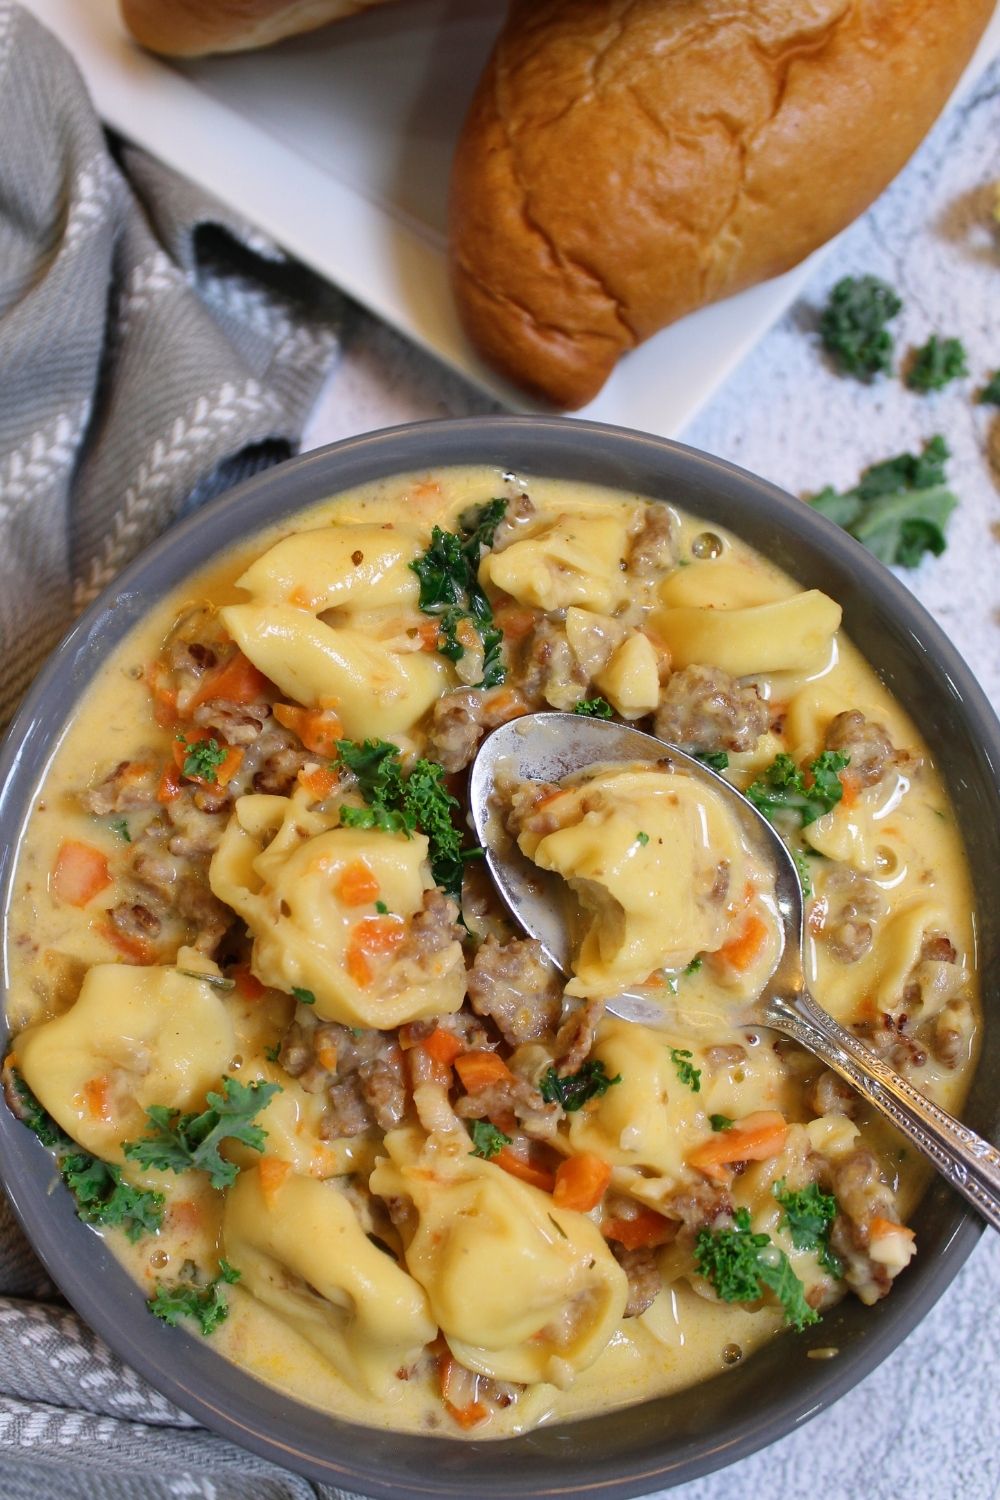 kale sausage tortellini soup in a bowl with rolls above